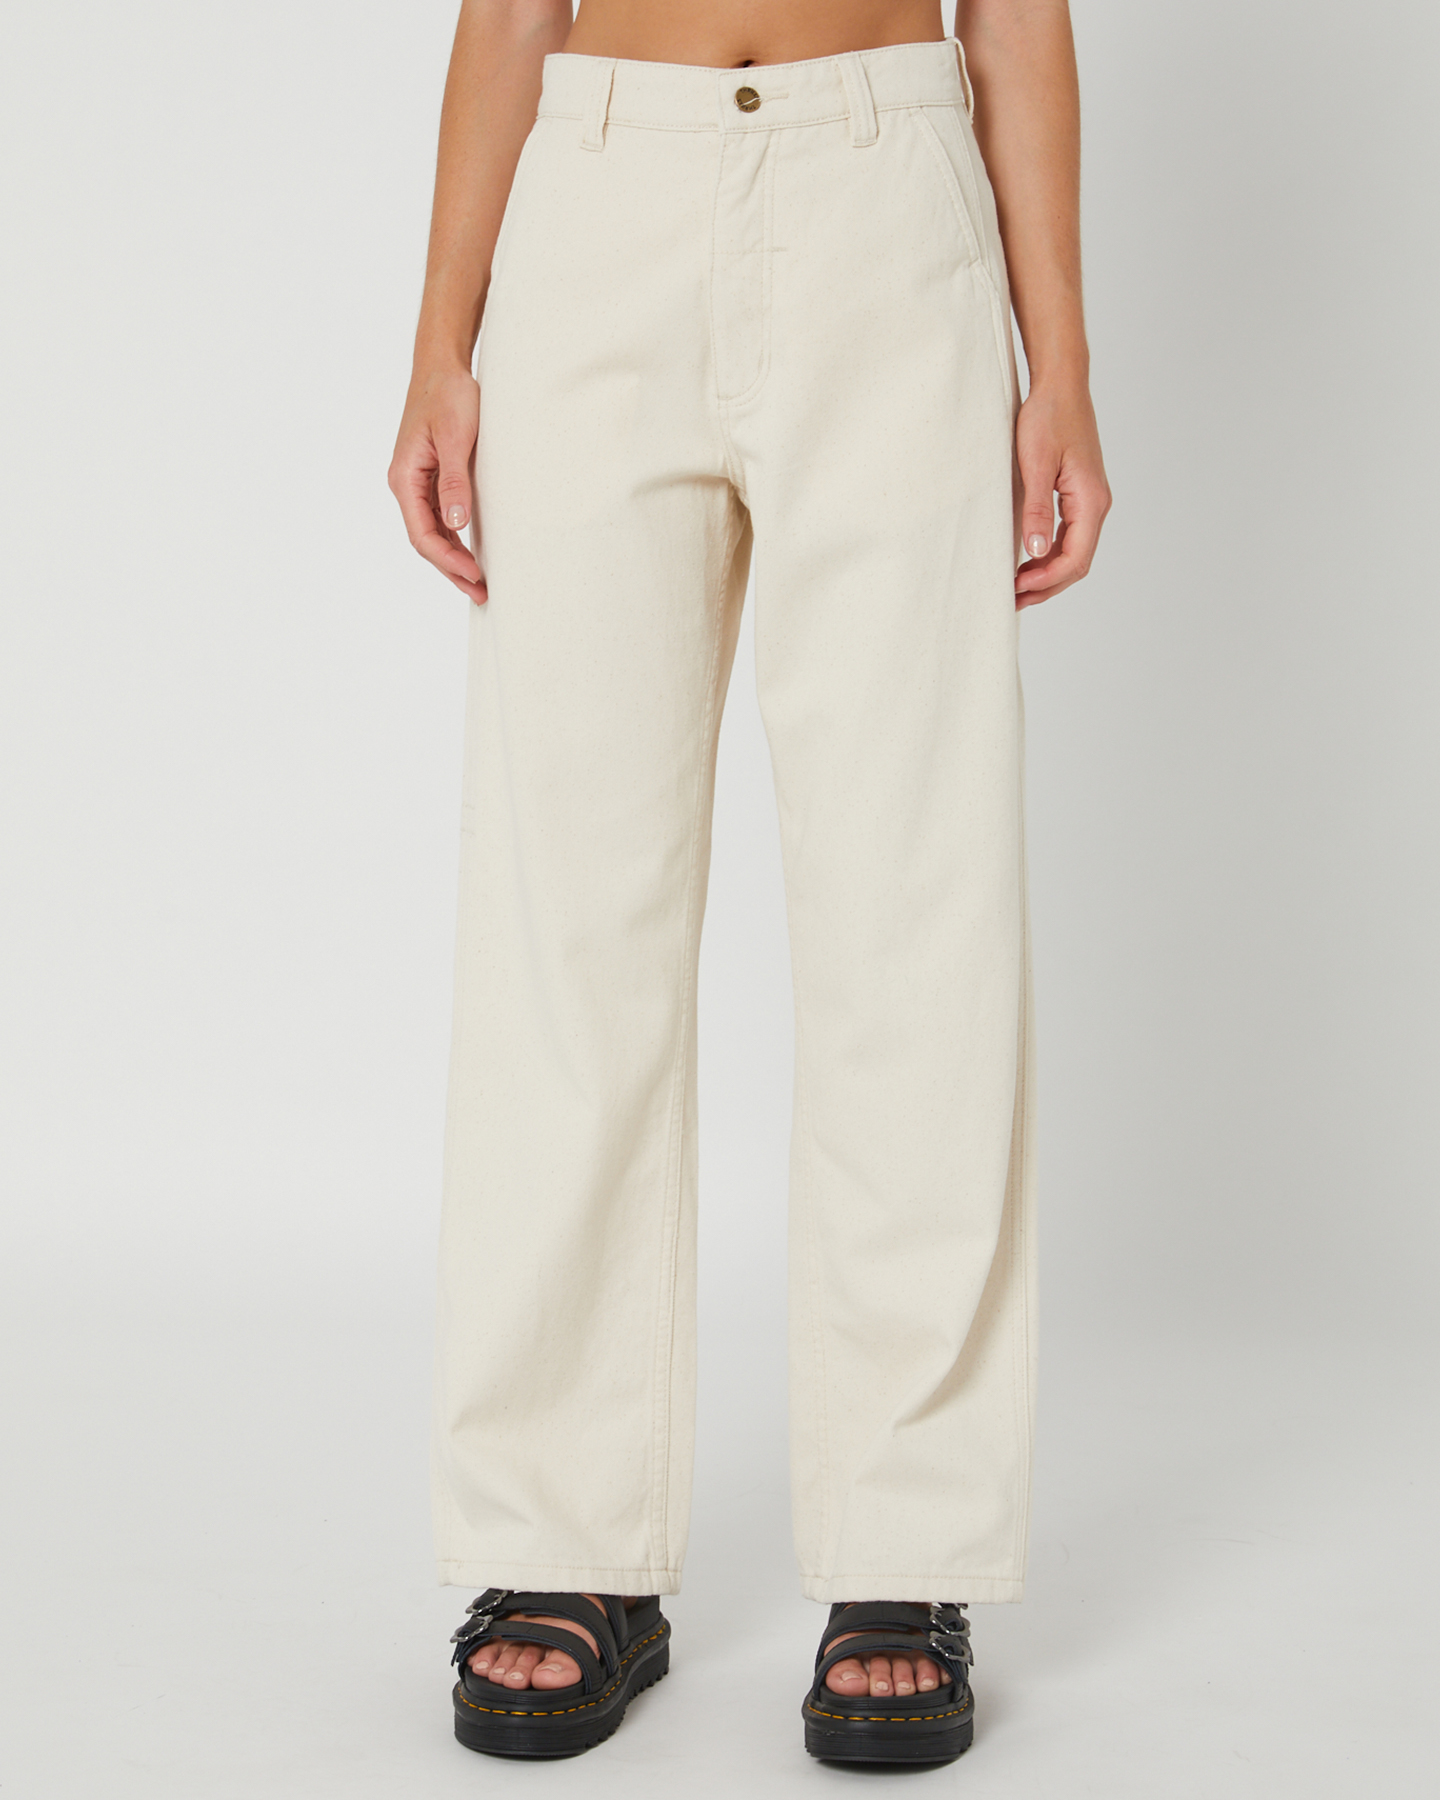 Thrills Composure Pant Unbleached - Unbleached | SurfStitch